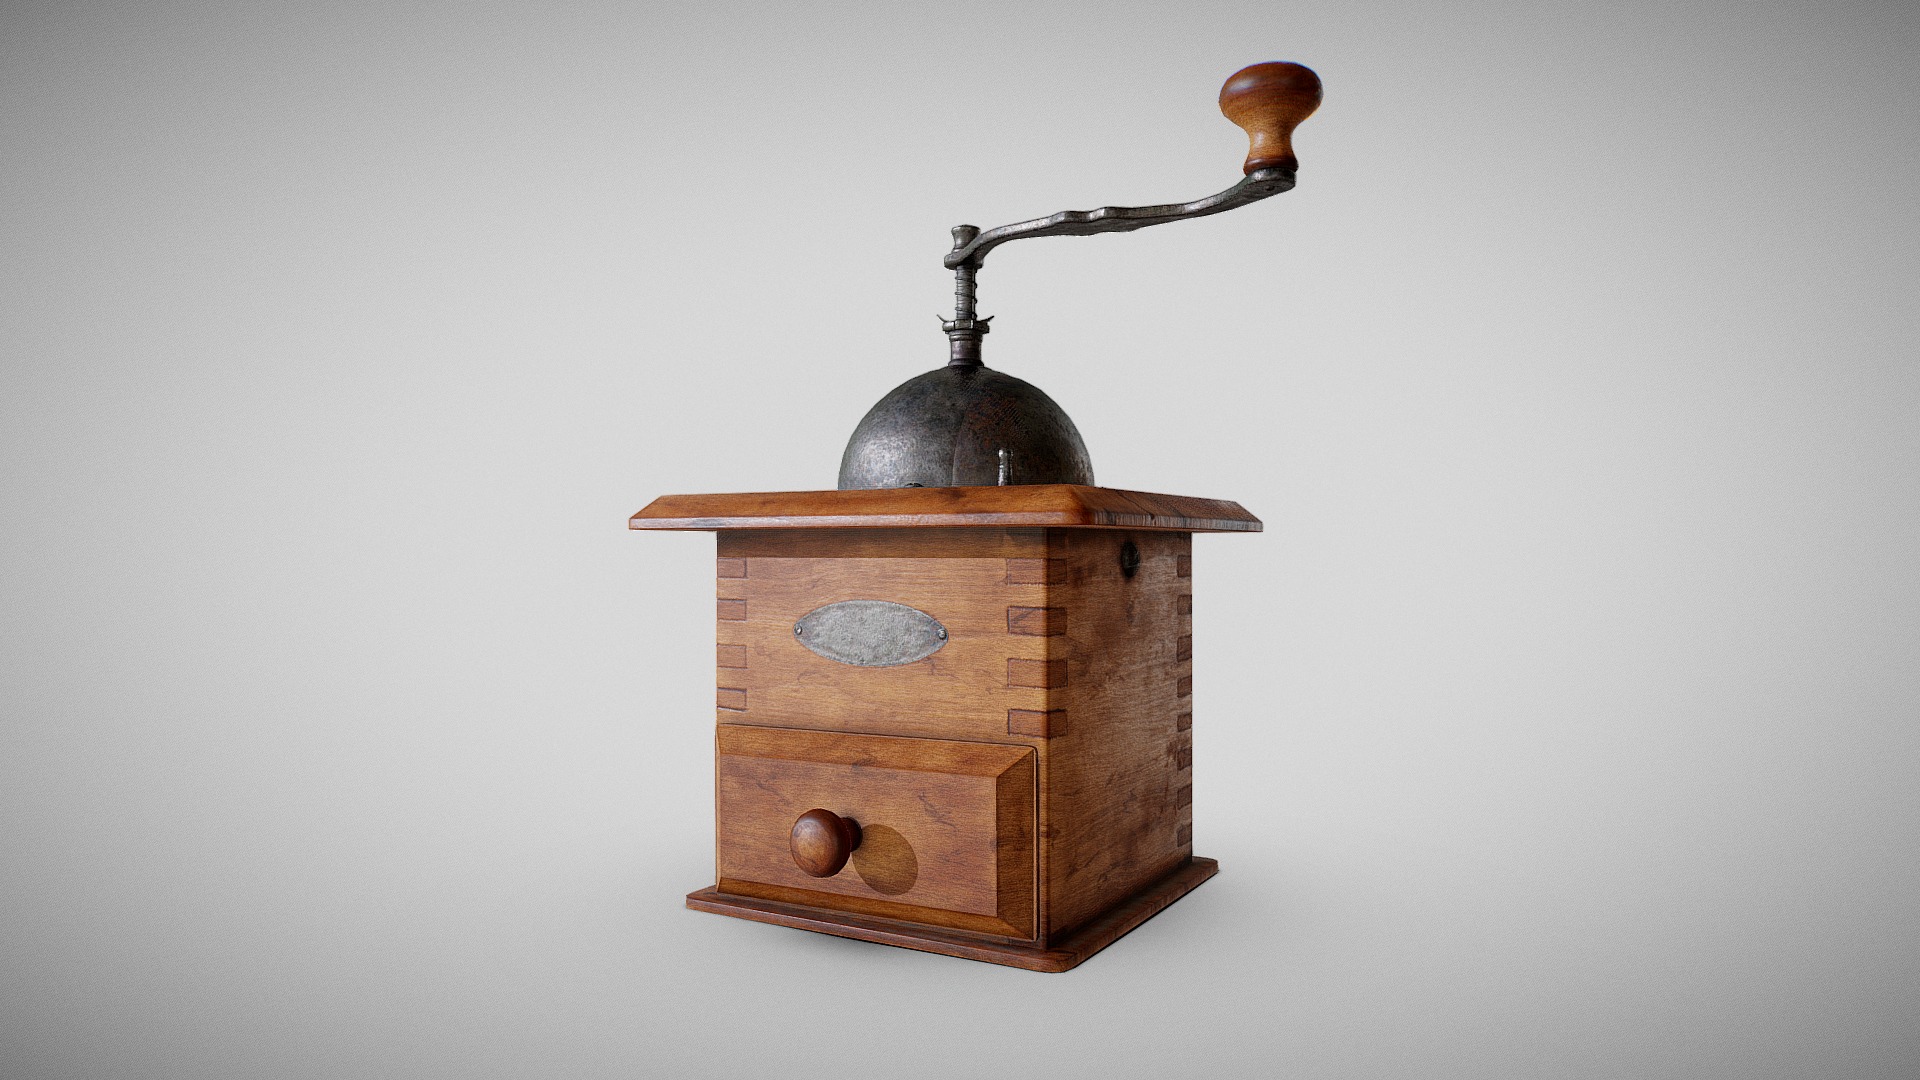 3D model PBR Pepper/Coffee Mill - This is a 3D model of the PBR Pepper/Coffee Mill. The 3D model is about a wooden bell on a wooden stand.